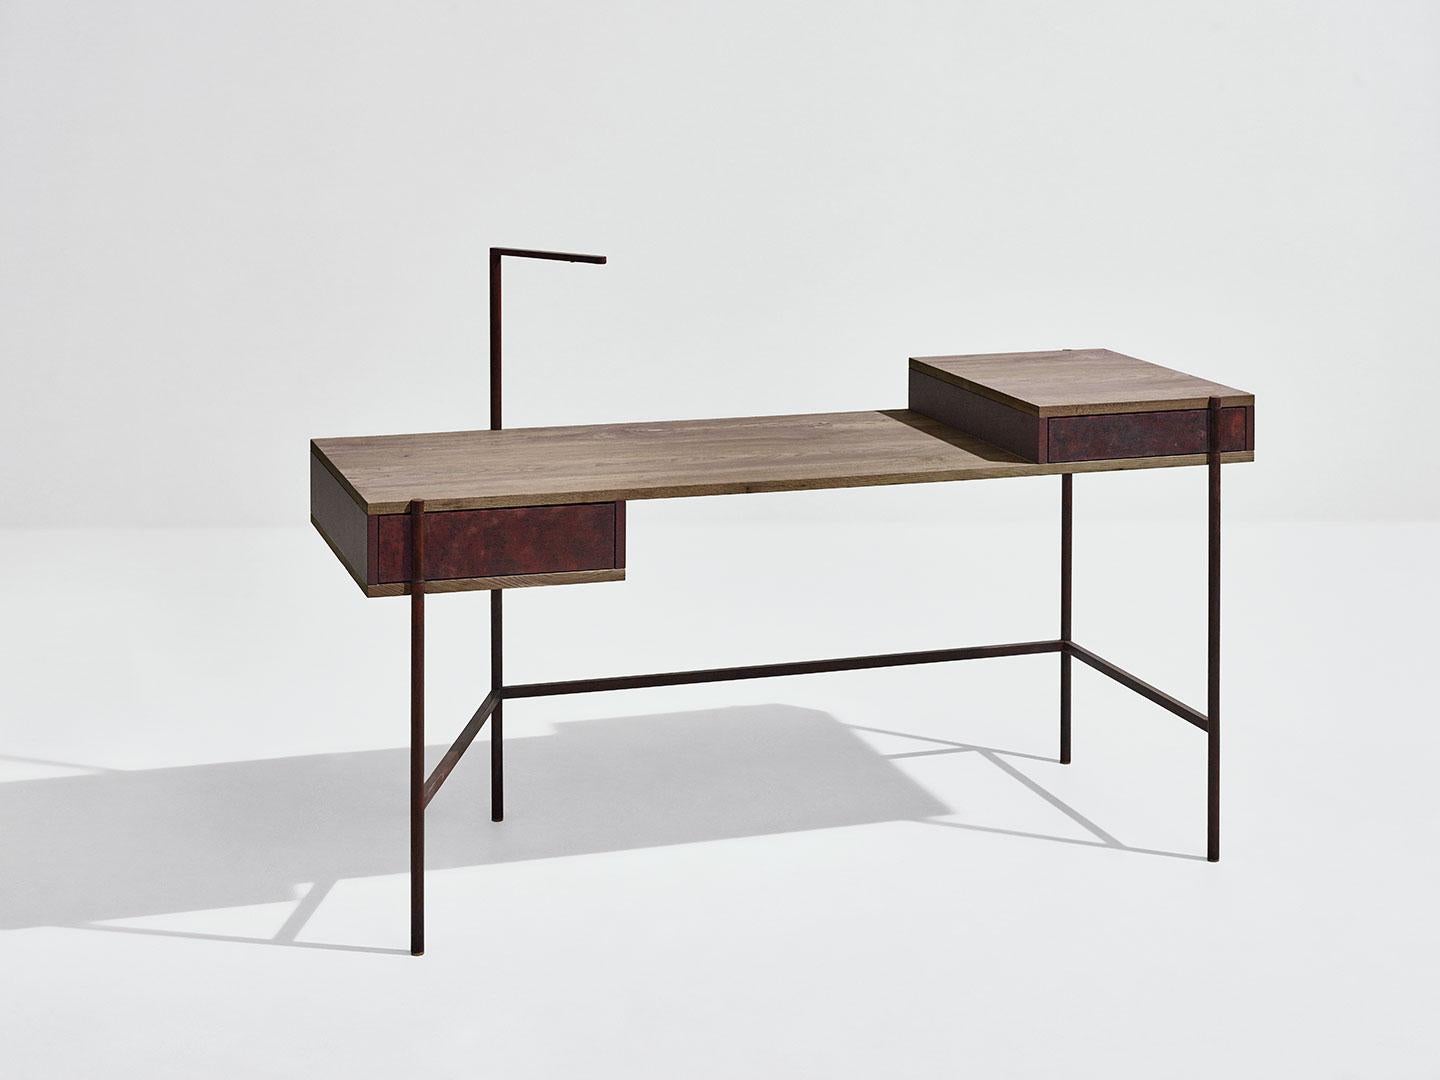 Pivot Desk by SEM
Dimensions: W150 x D57 x H72 cm
Material: metallic tubolar structure, pivoting doors in surface in antique brass or patinas, shelves in fossil elm or Canaletto walnut, Side and back panels in matt
painted MDF. 
Available in